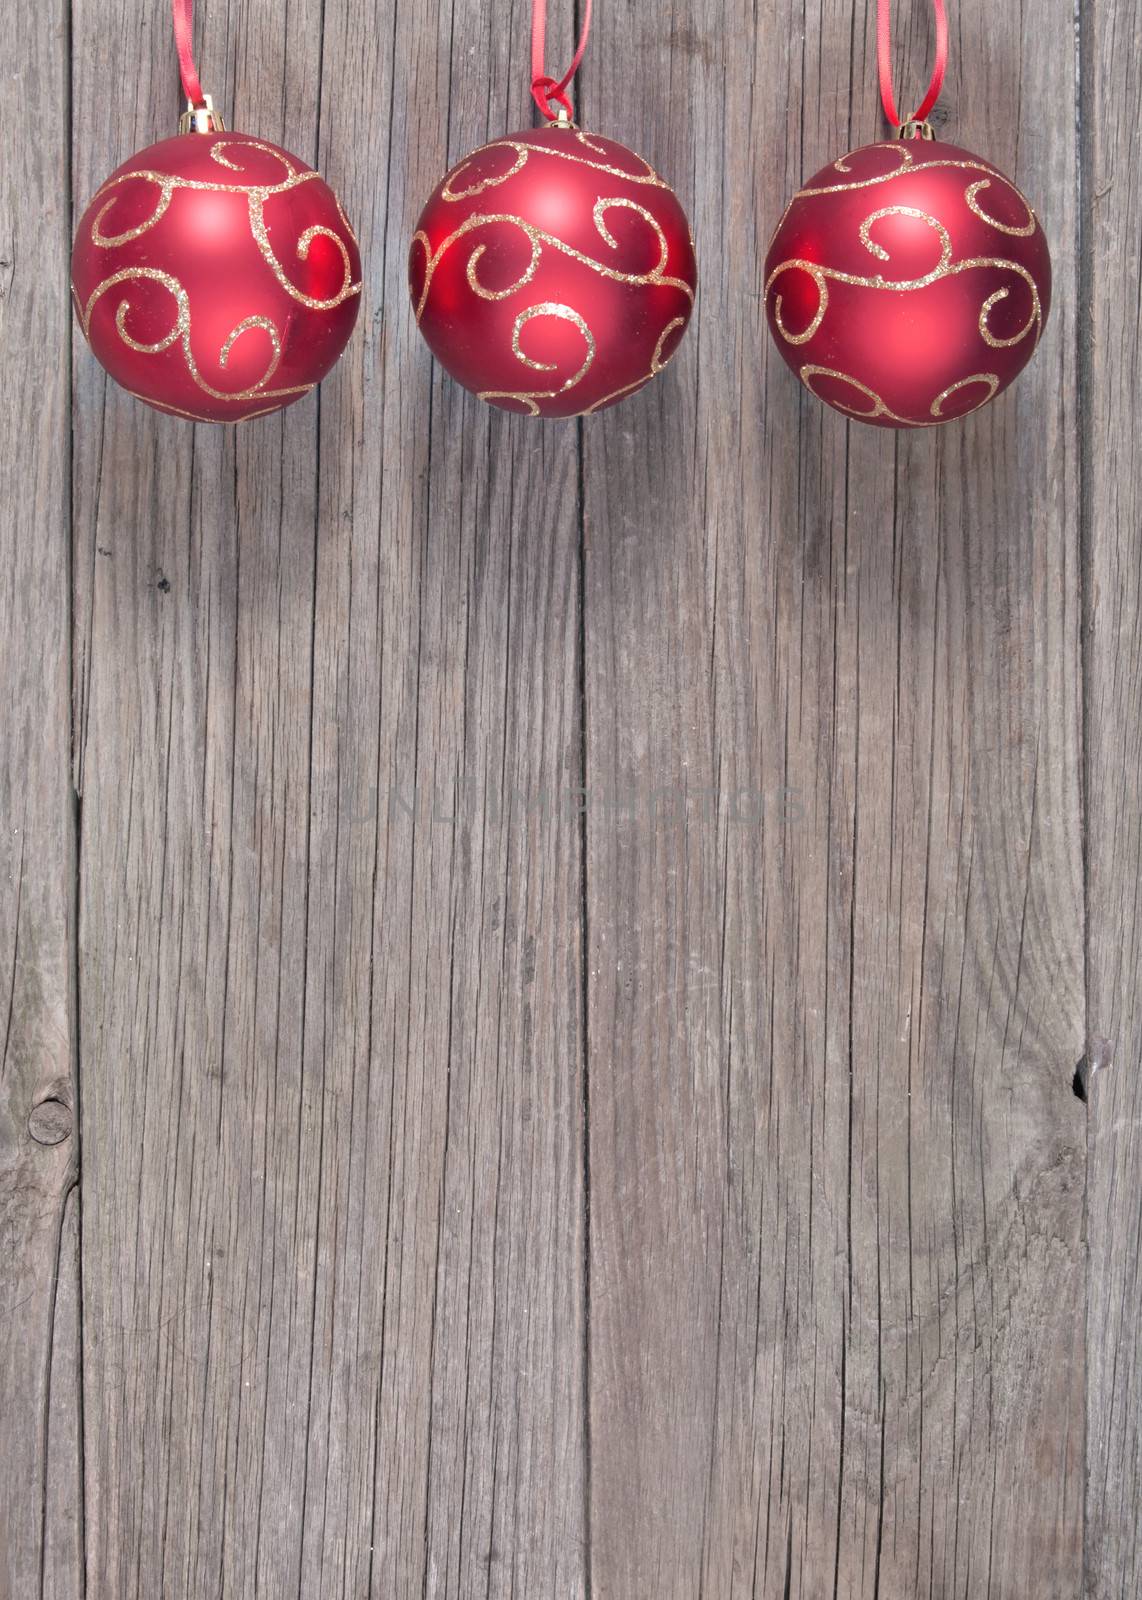 Christmas baubles with a red ribbon frame on a wood texture